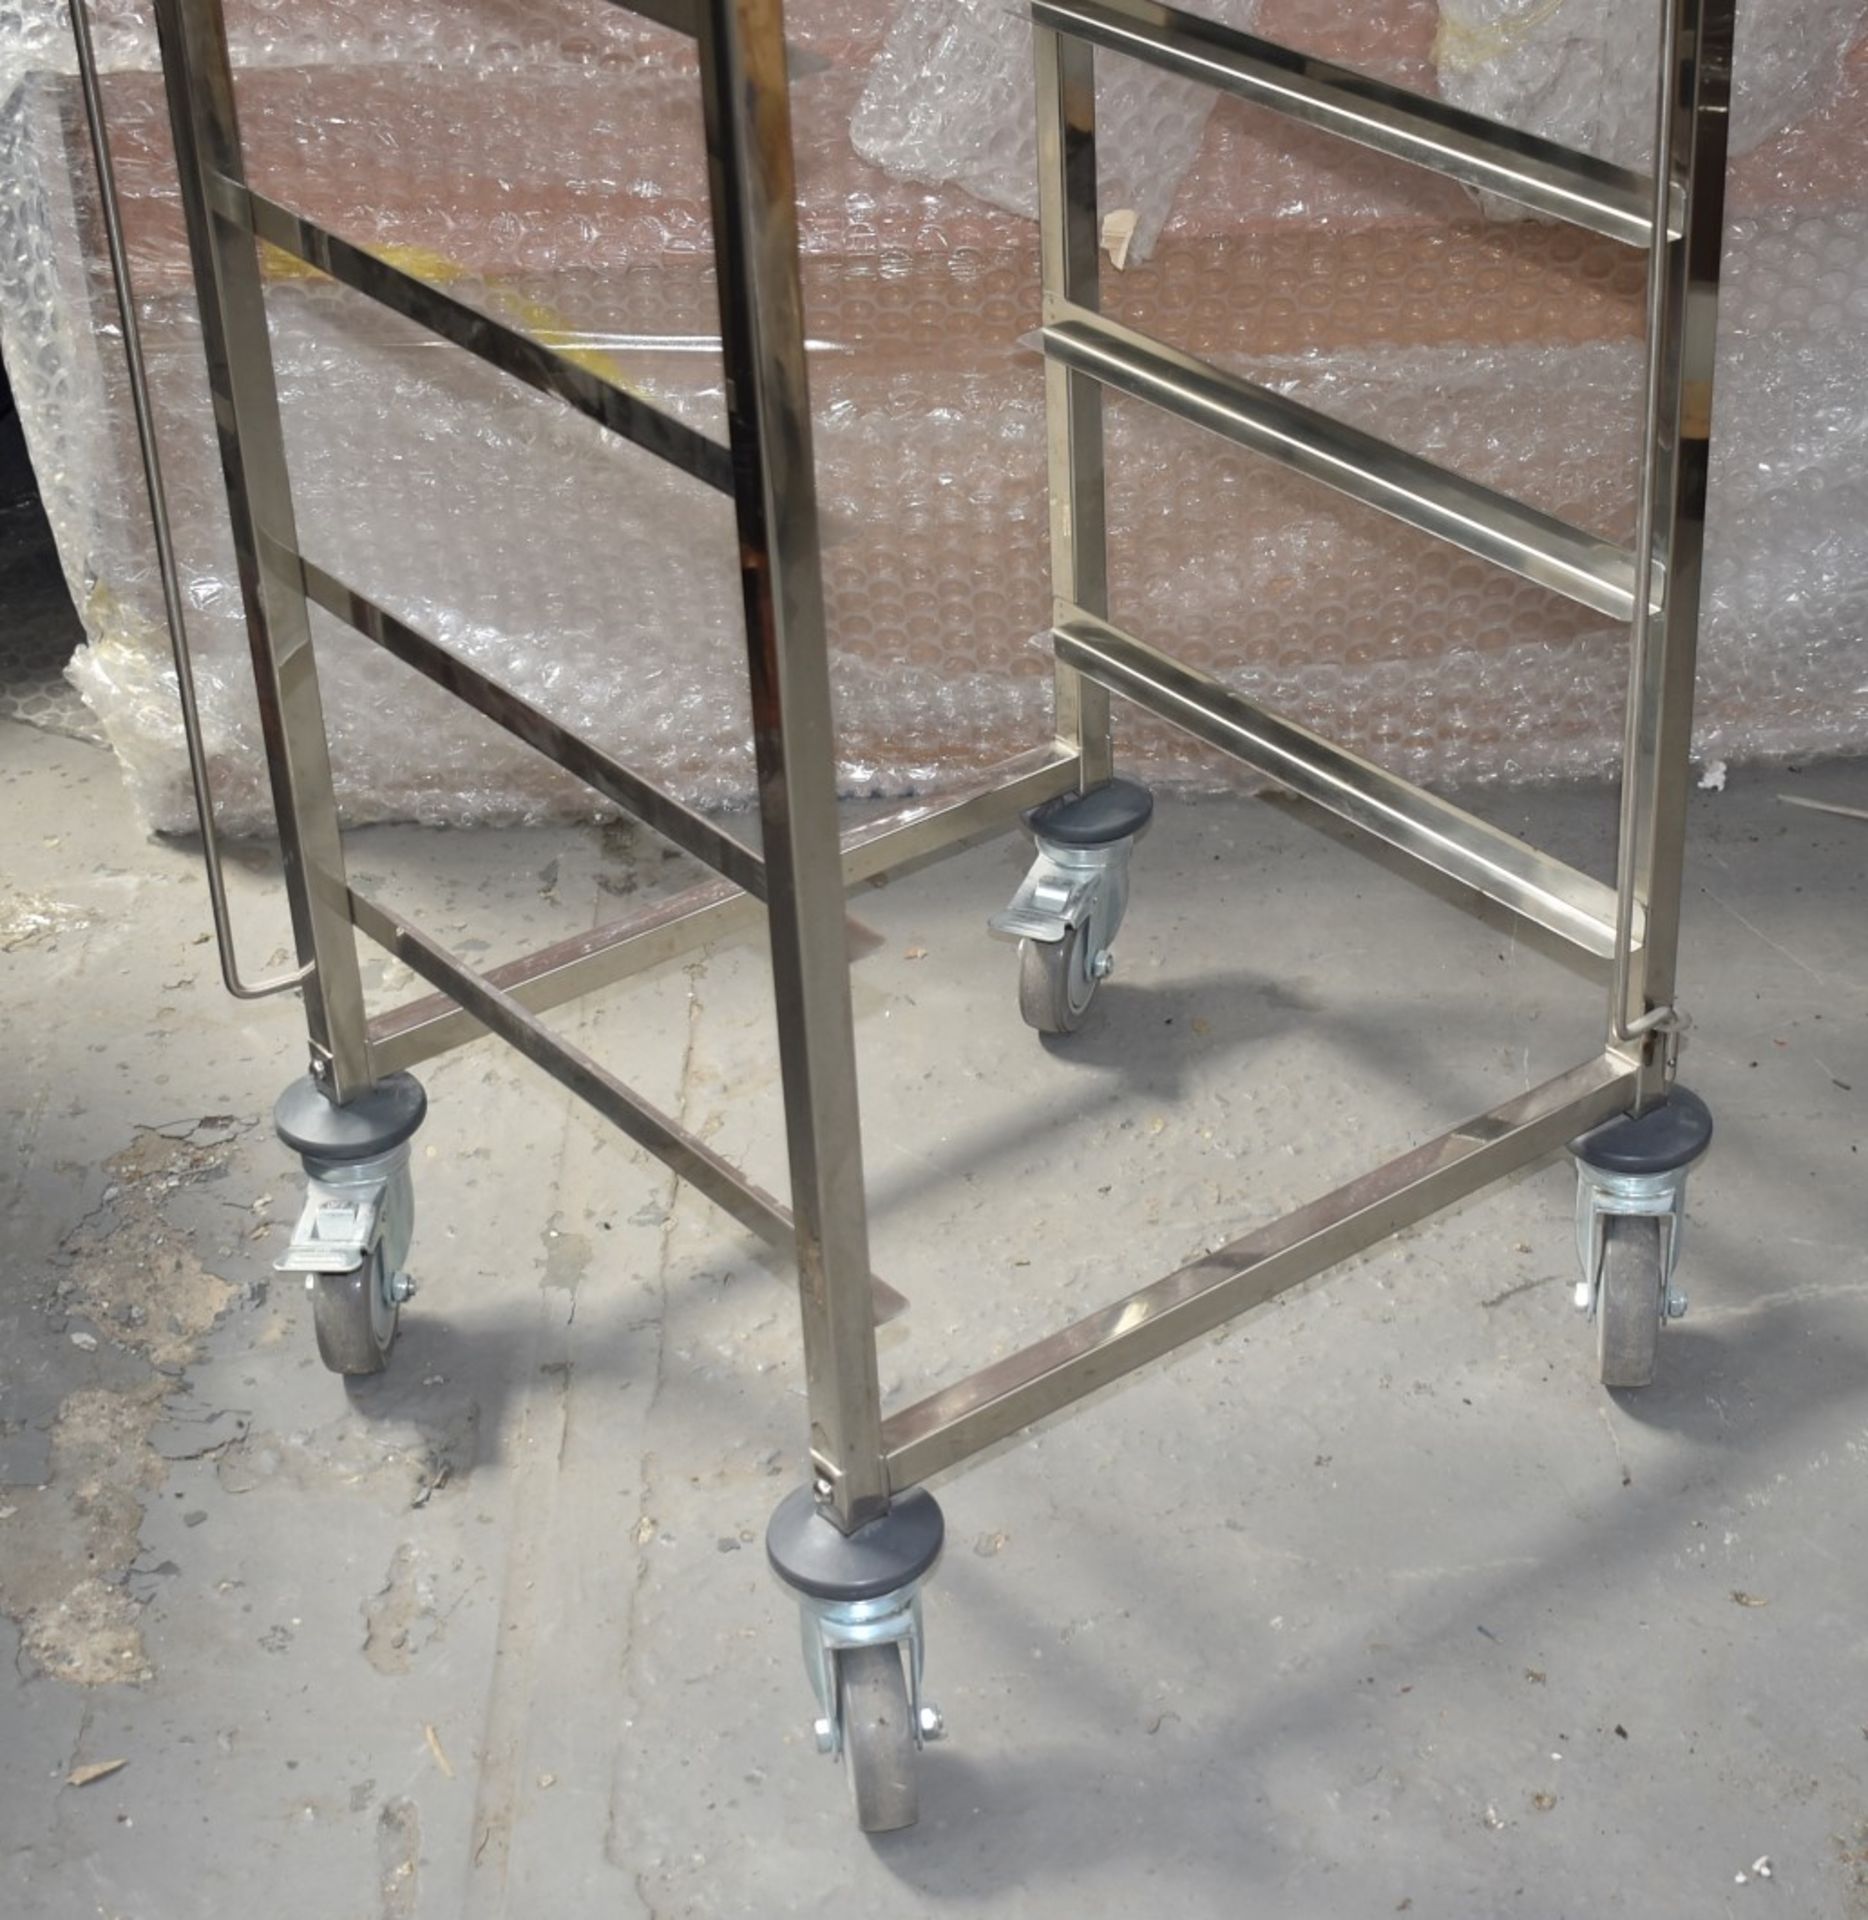 1 x Stainless Steel 7 Tier Food Tray Rack - Dimensions: H171 x W56 x D5 cms - Suitable For Trays - Image 2 of 7